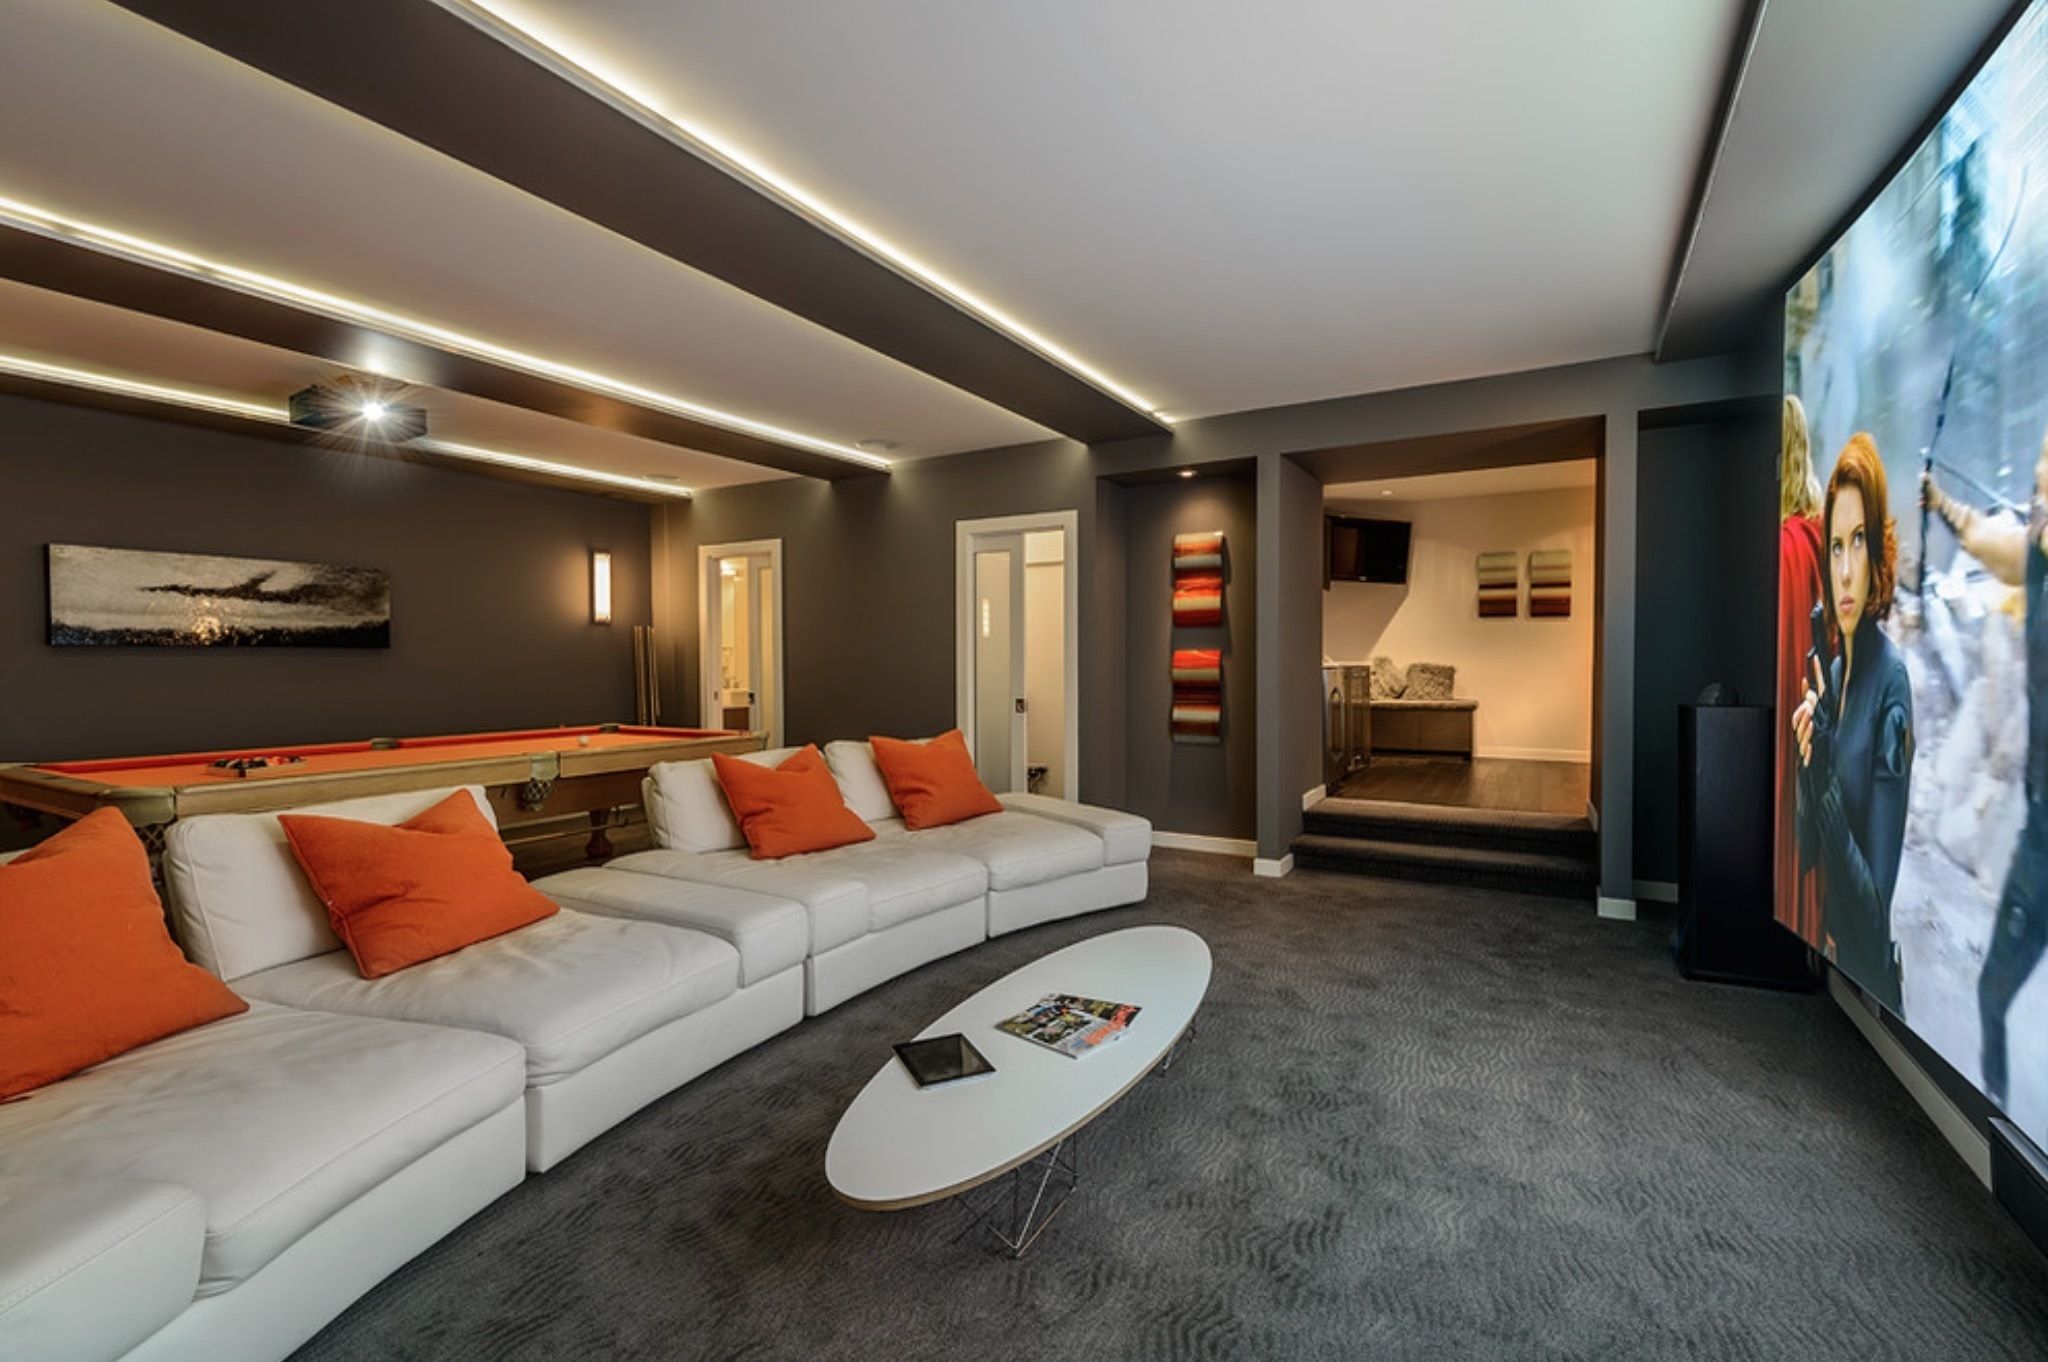 Tastefully hidden LED-lighting maximizes your at-home theater experience